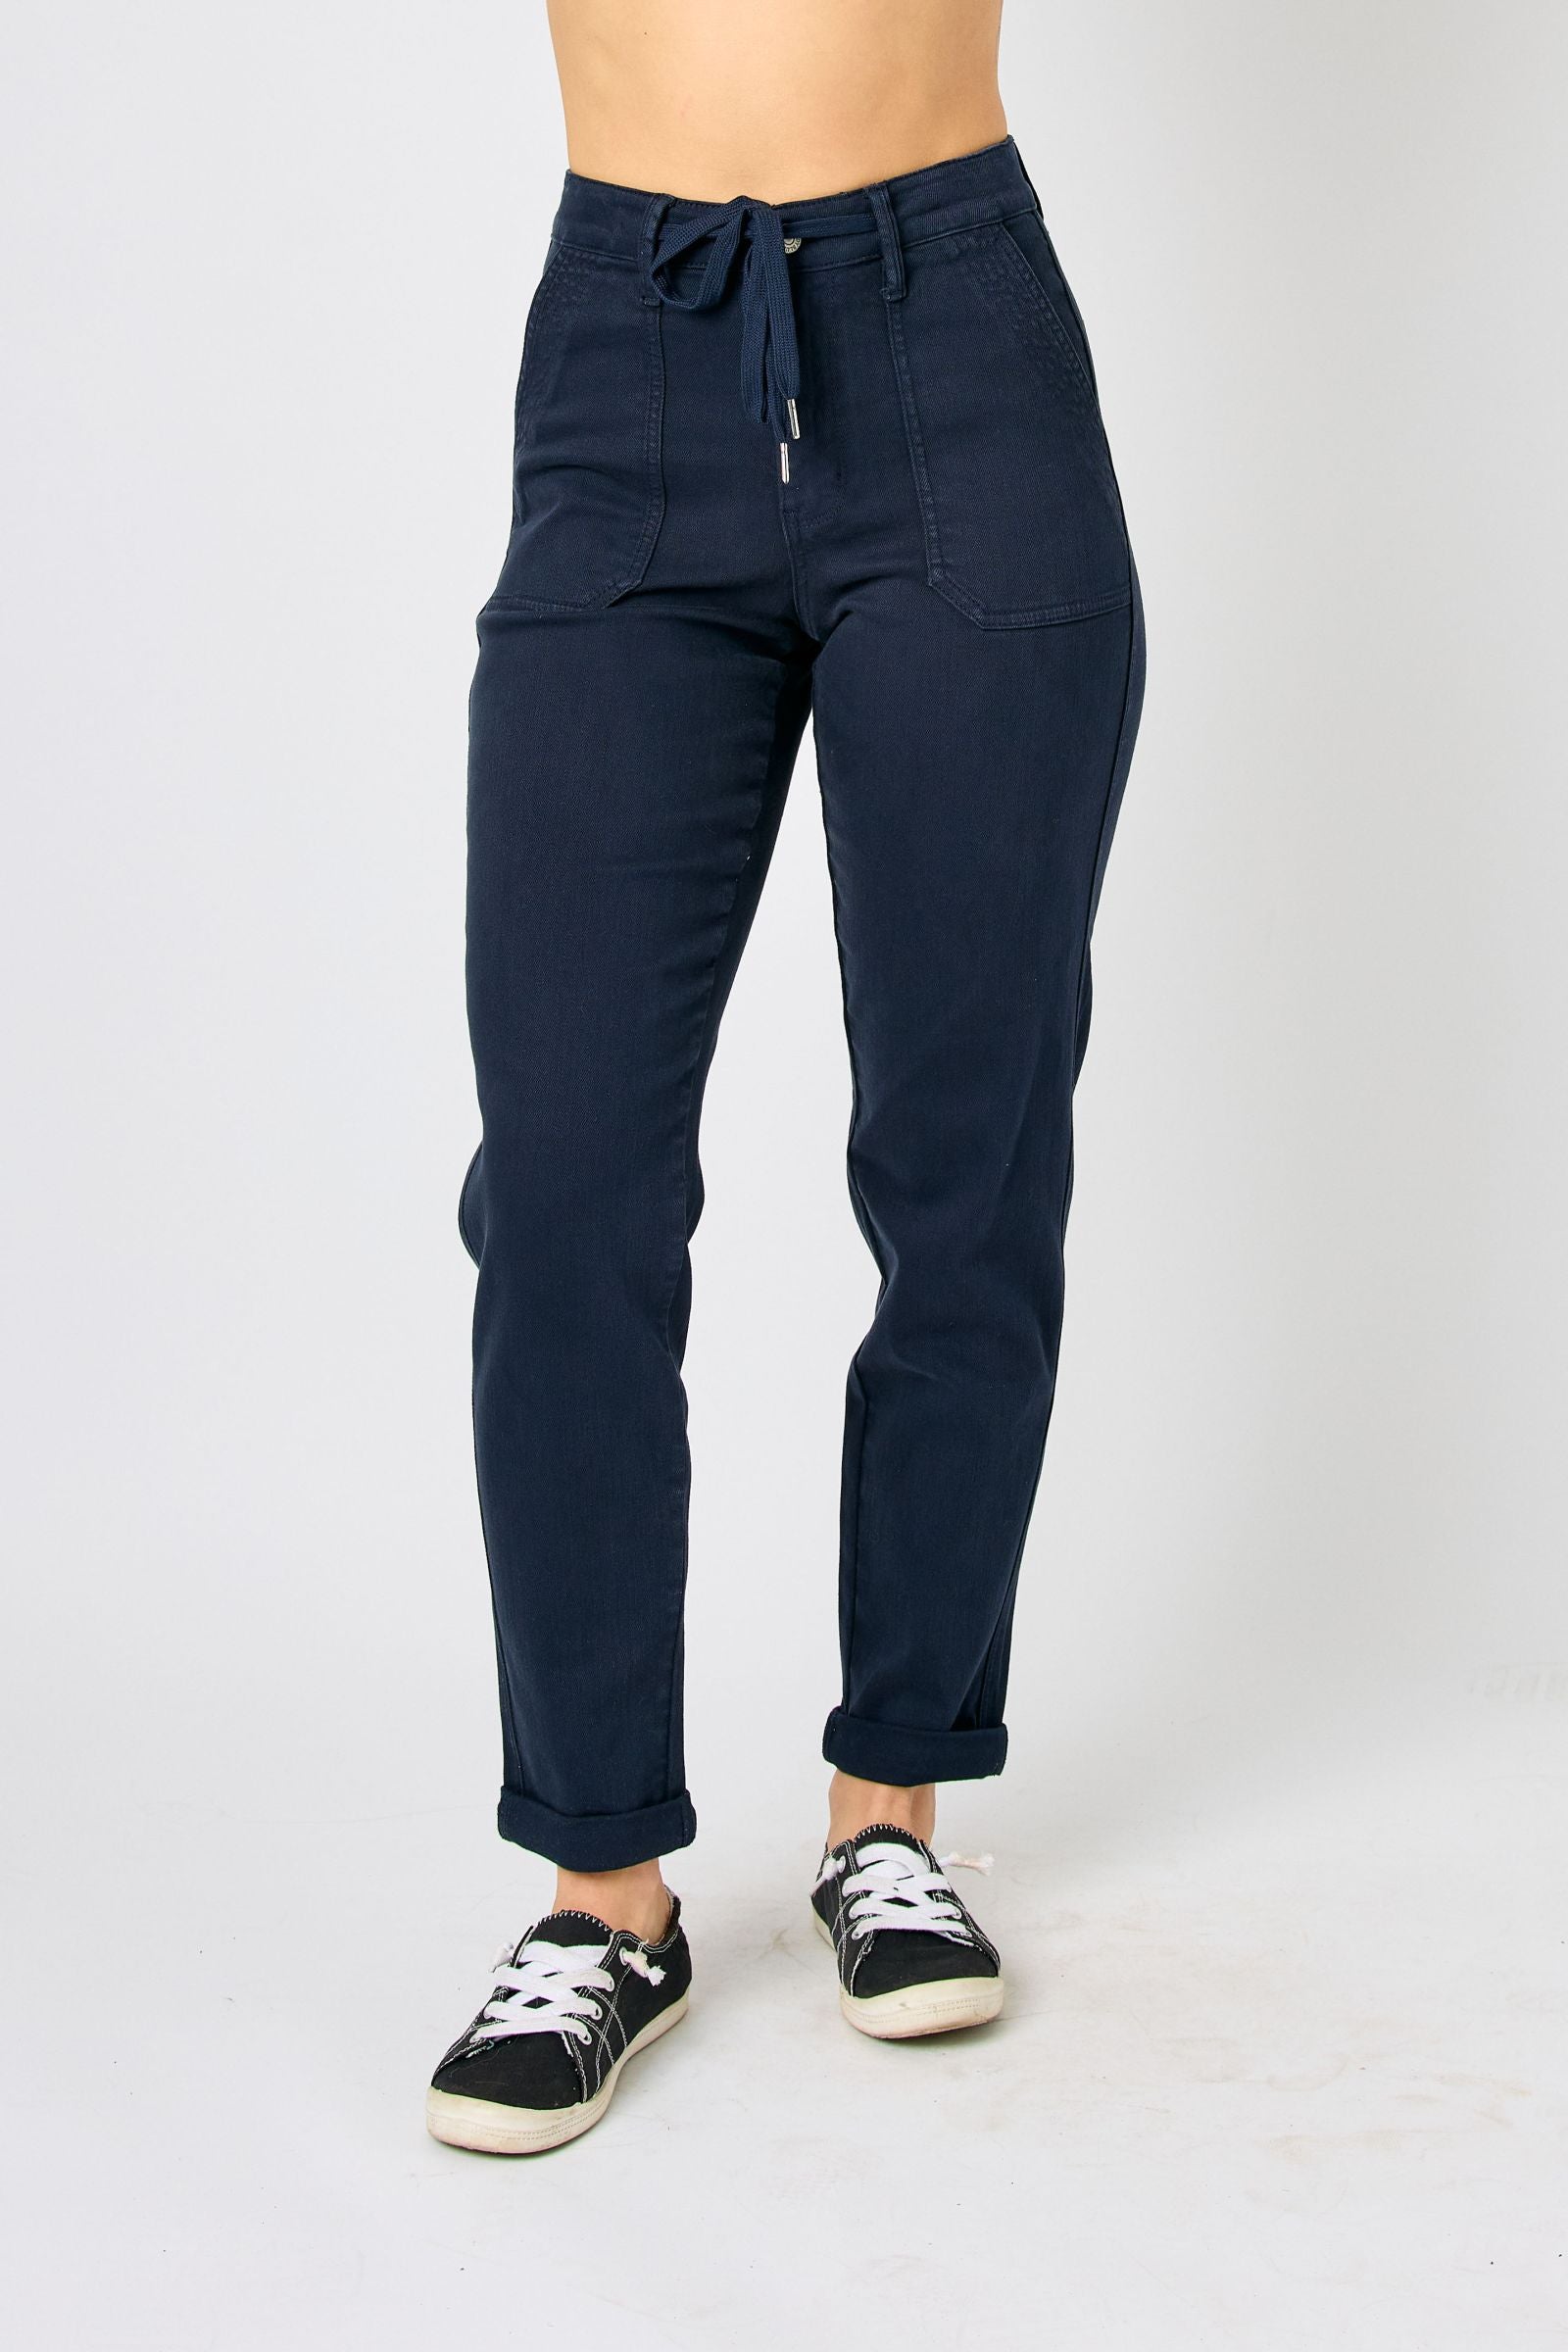 JUDY BLUE In the Navy Now Navy Denim Joggers